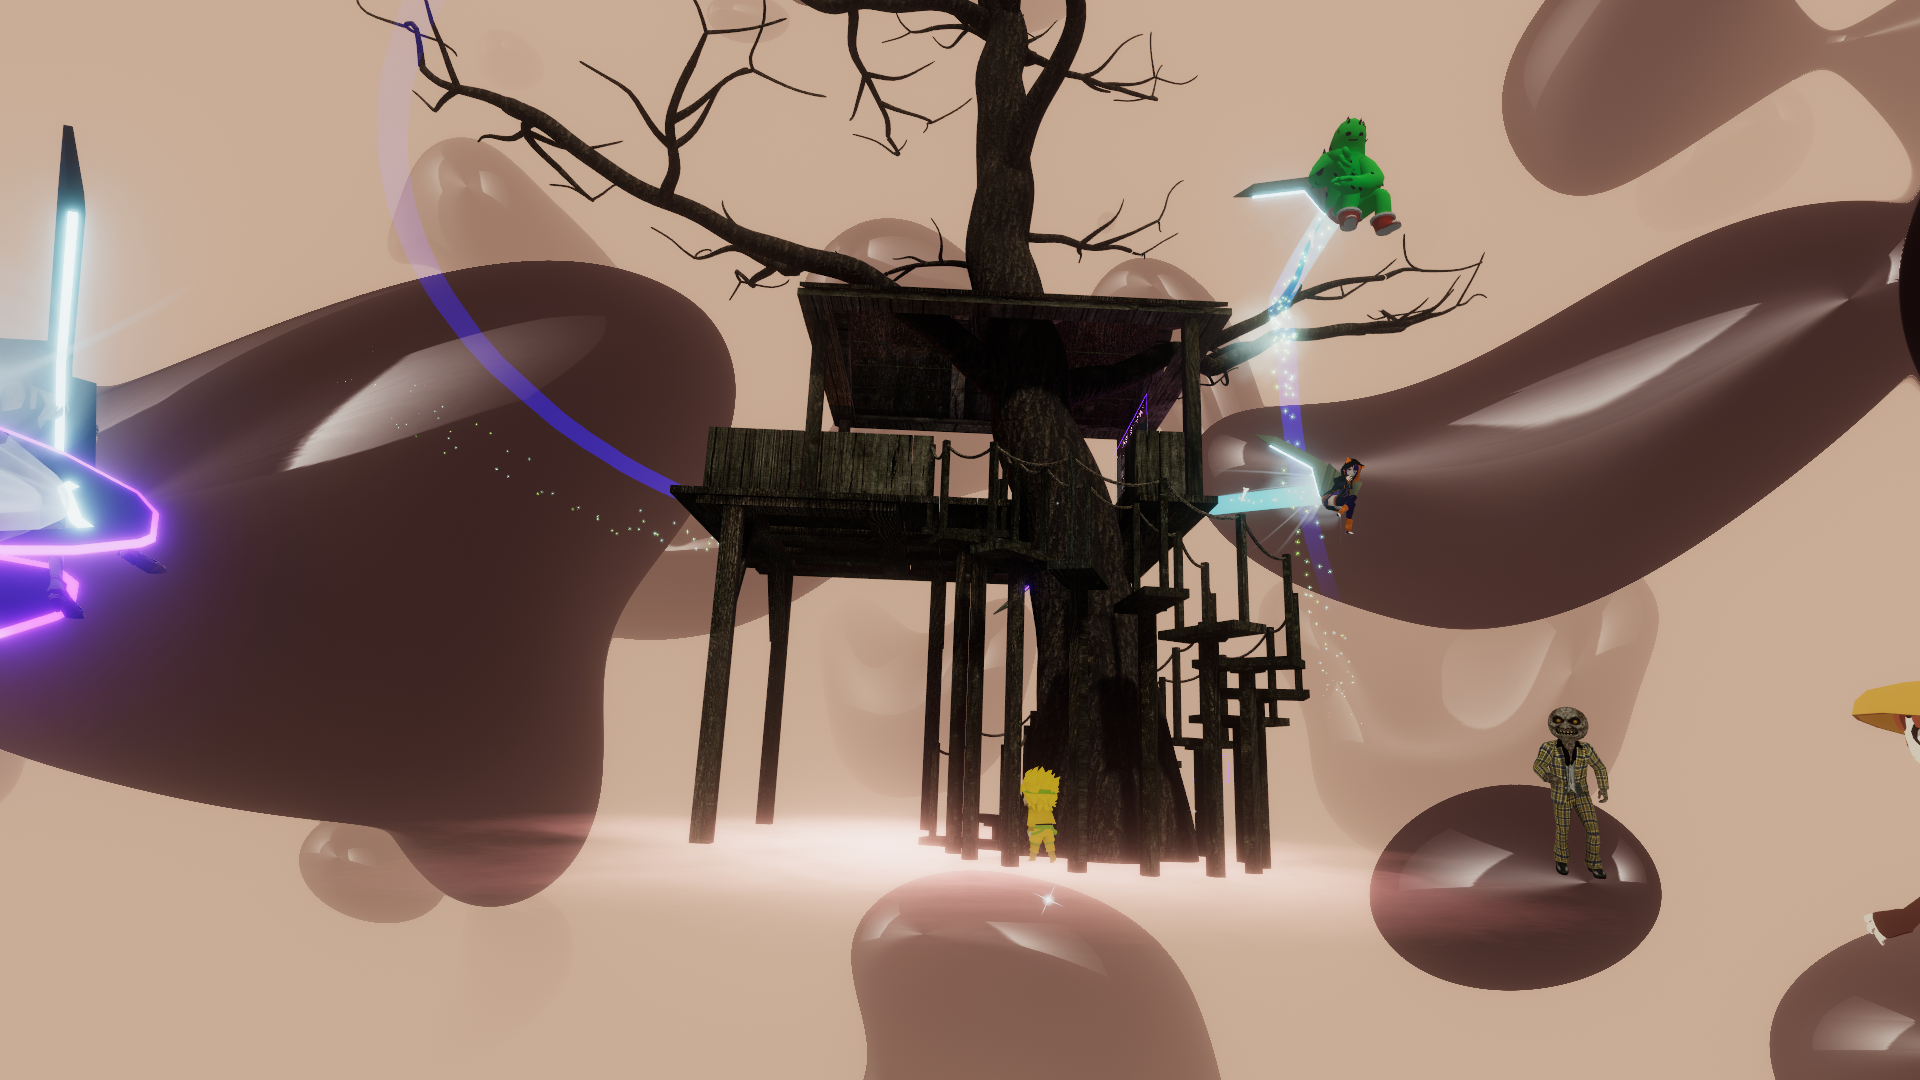 brown blobs in the background. A treehouse punctured by a tree is centered. Different virtual avatars fly around the frame.